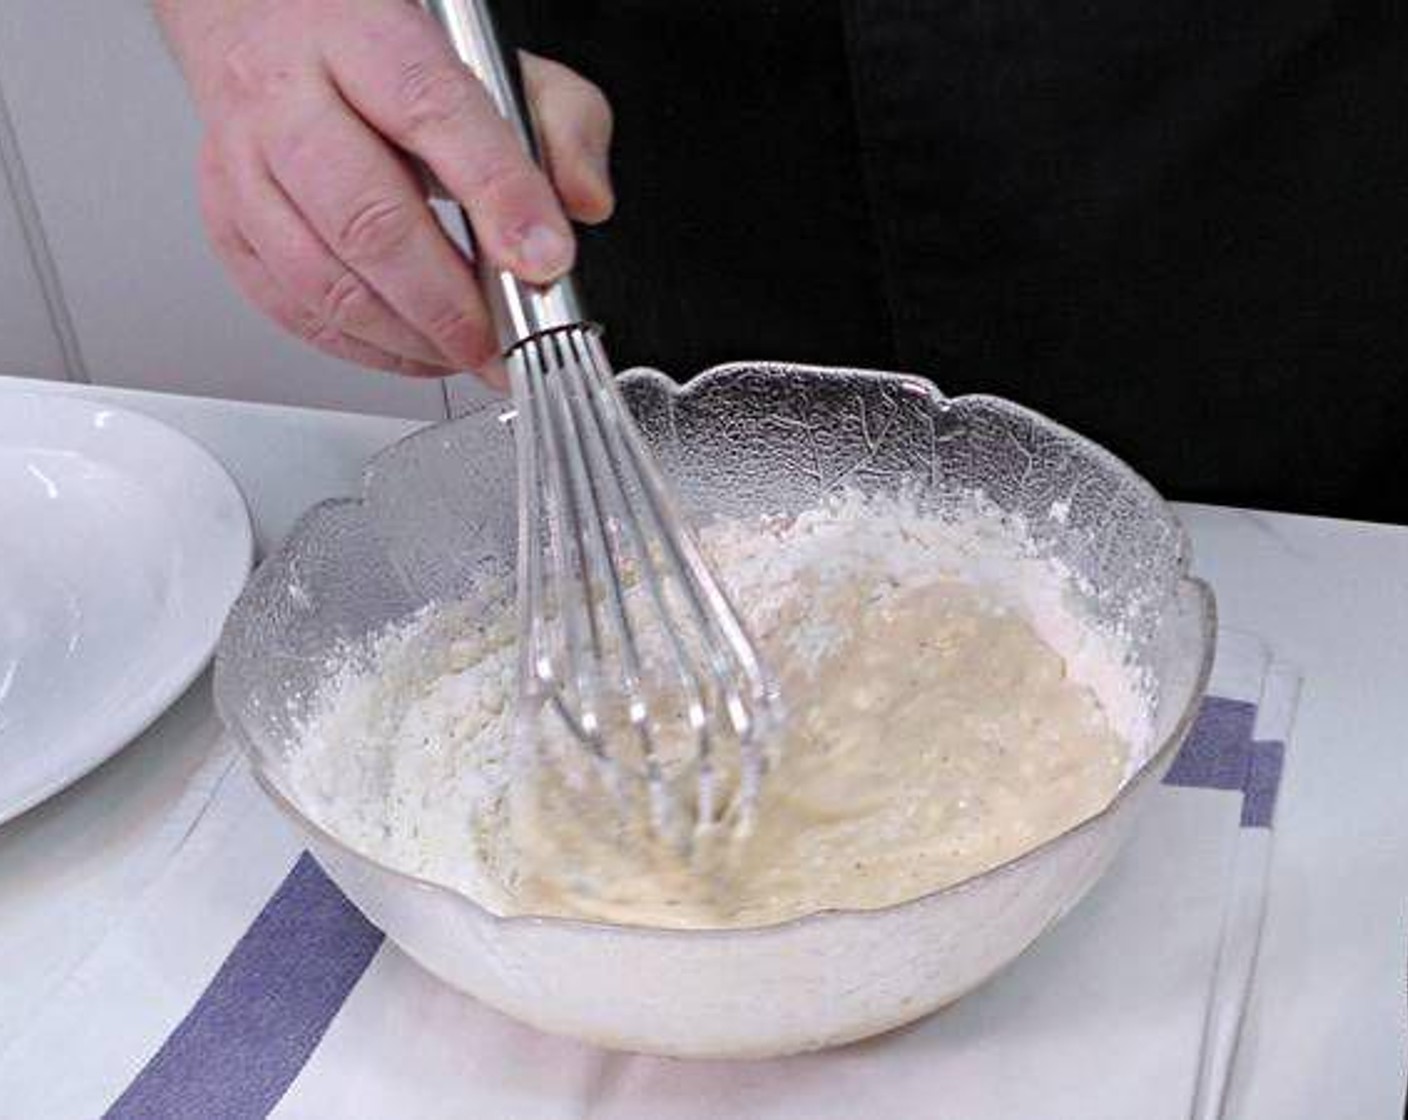 step 2 In another bowl, mix the All-Purpose Flour (1 cup), Baking Powder (1 tsp), and Salt (to taste). Mix the dry ingredients with the wet ingredients until combined. Cover the bowl with the batter with plastic film and place it in the fridge for 1 hour.